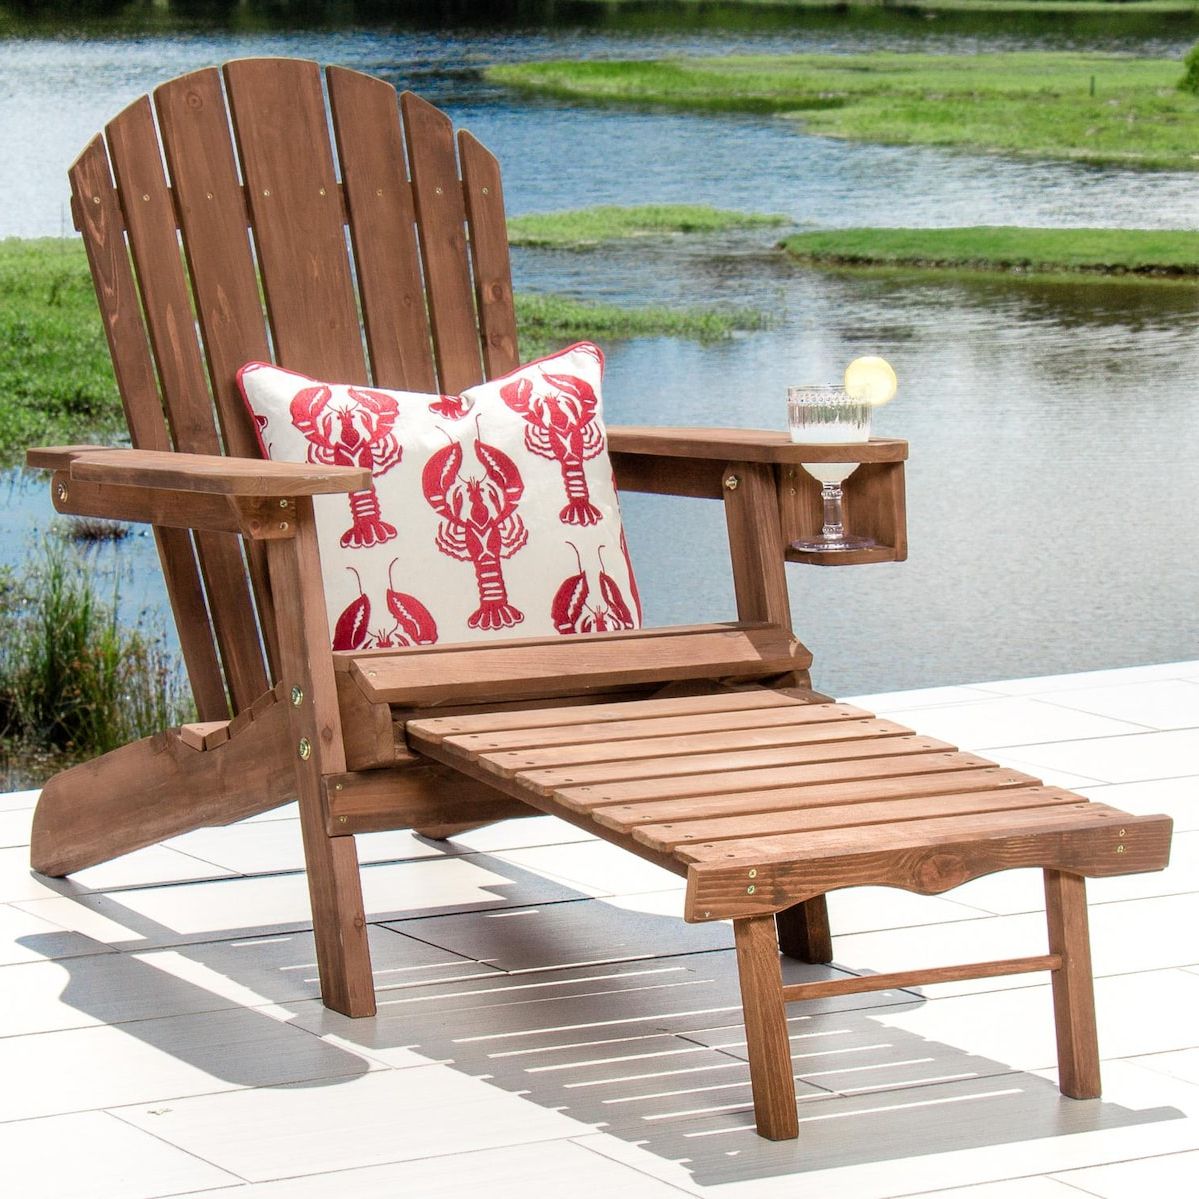 2019 Pelican Hill Wood Adirondack Patio Chair With Pull Out Ottoman – Dark Inside Dark Wood Outdoor Chairs (View 3 of 15)